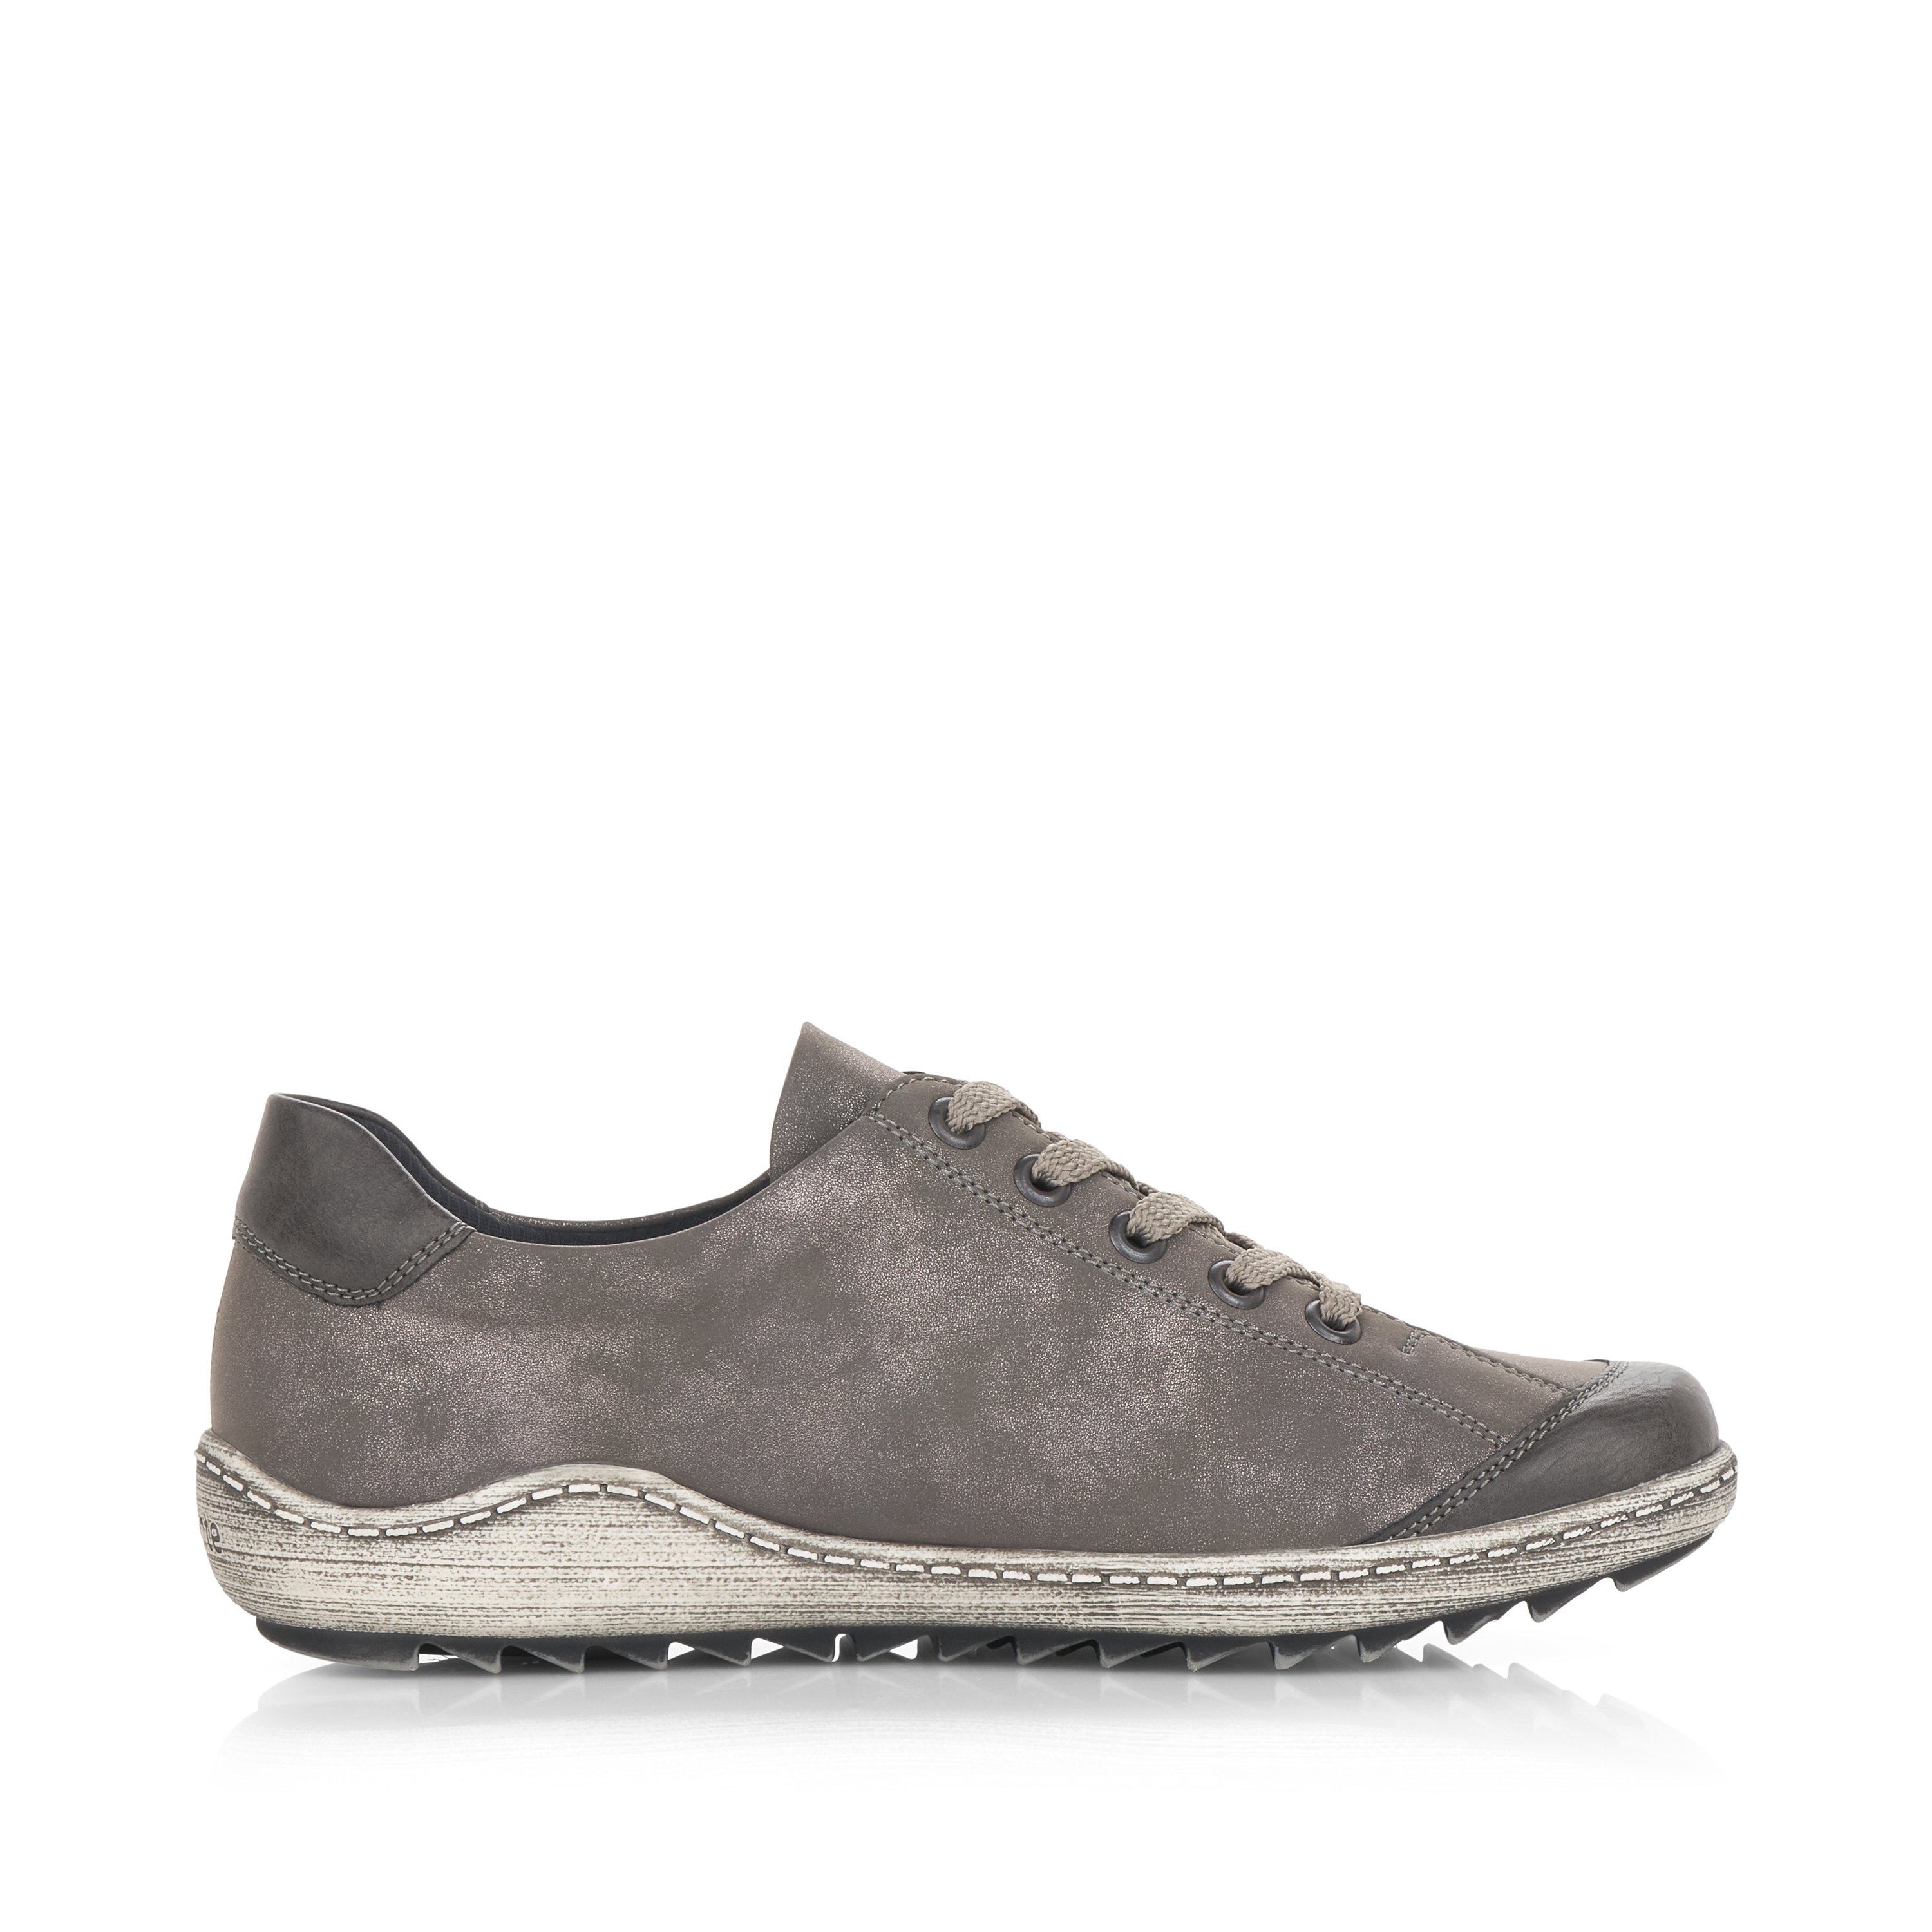 Silver grey remonte women´s lace-up shoes R1402-44 with flexible profile sole. Shoe inside